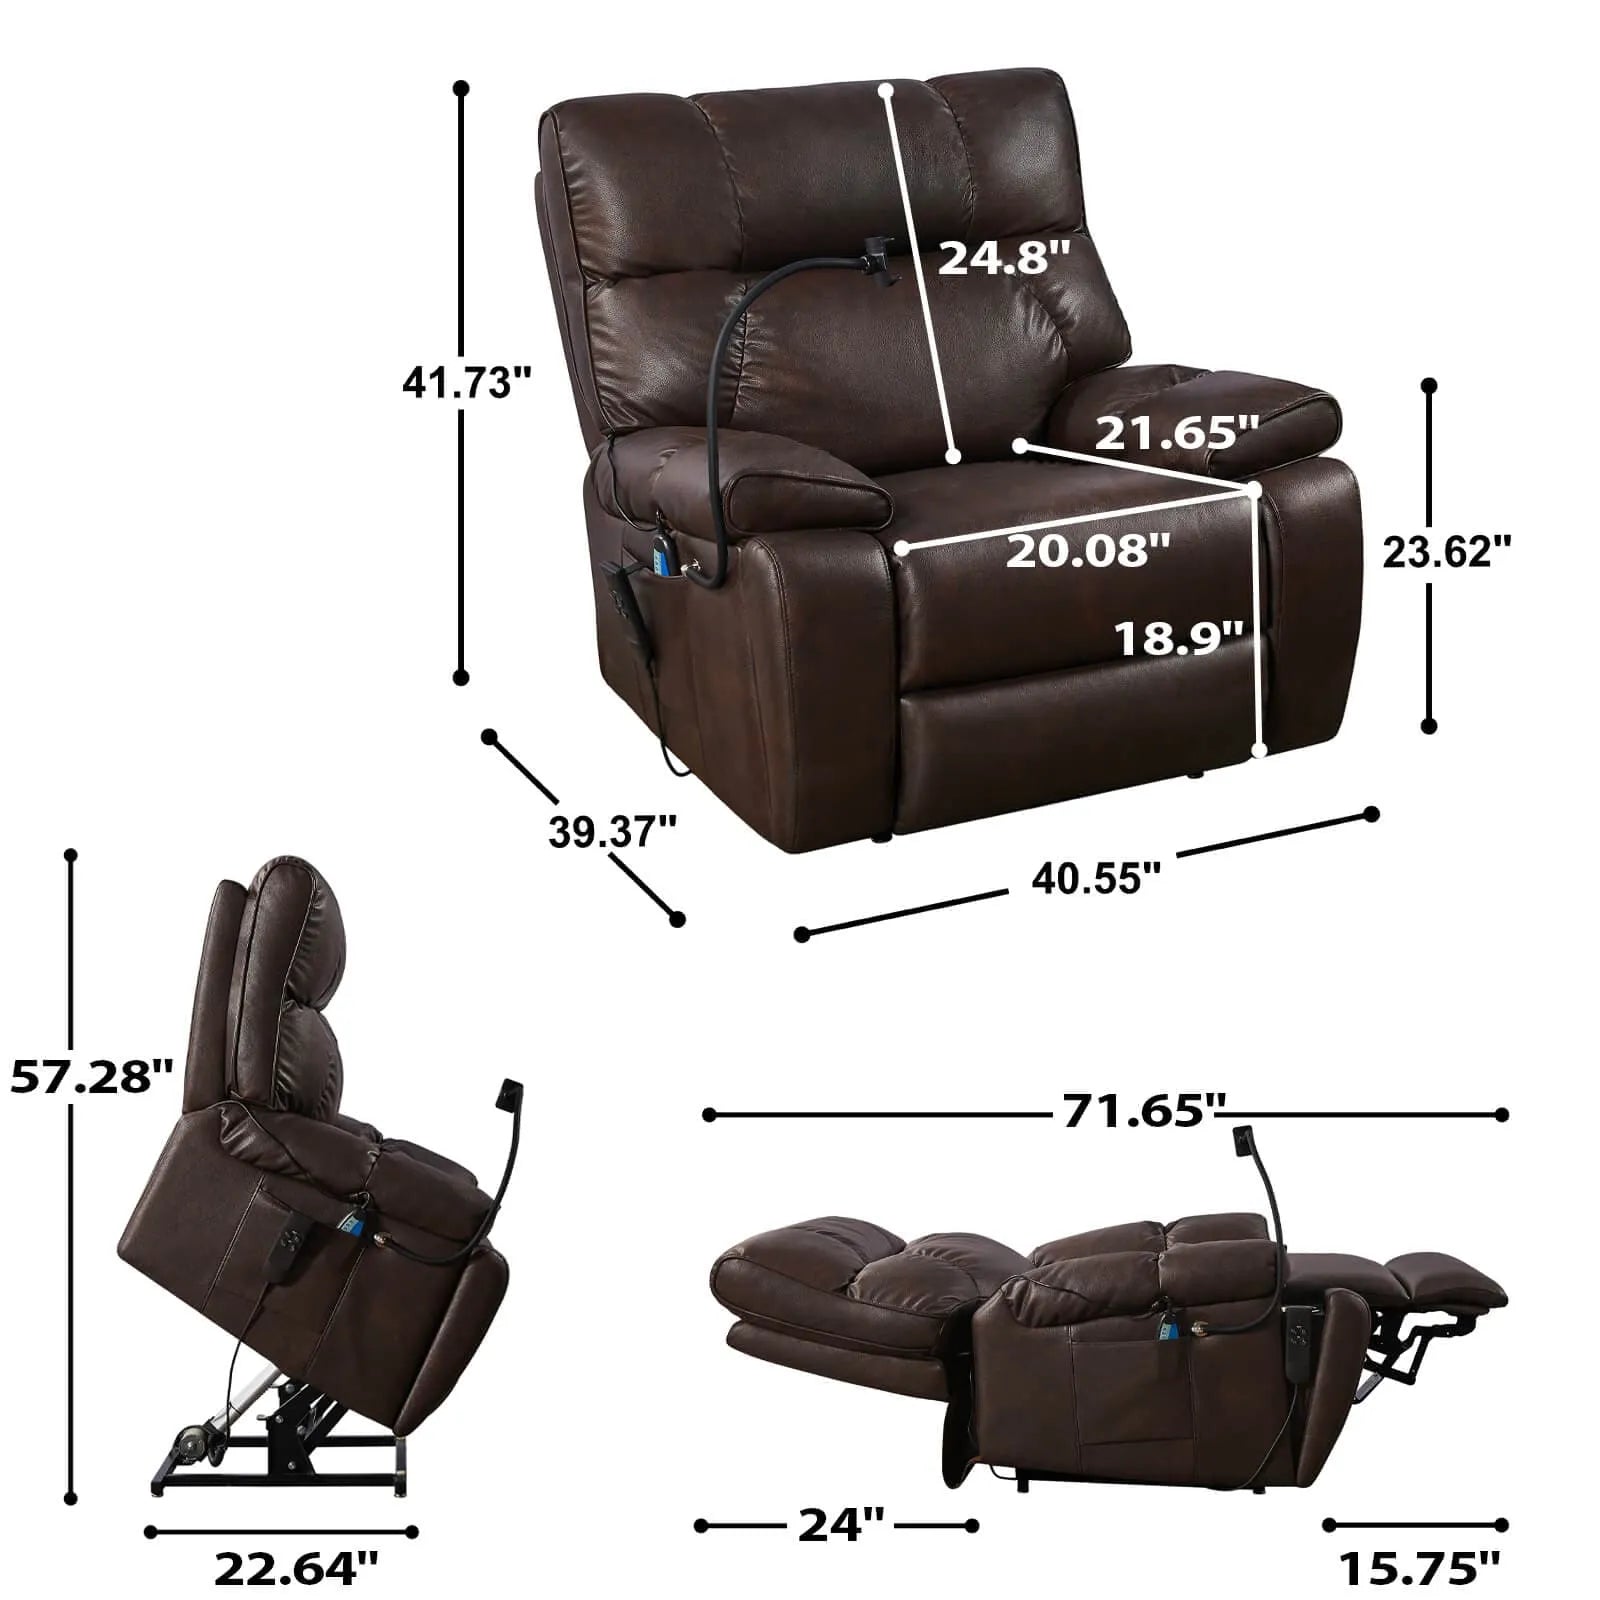 size of lay flat recliner chair